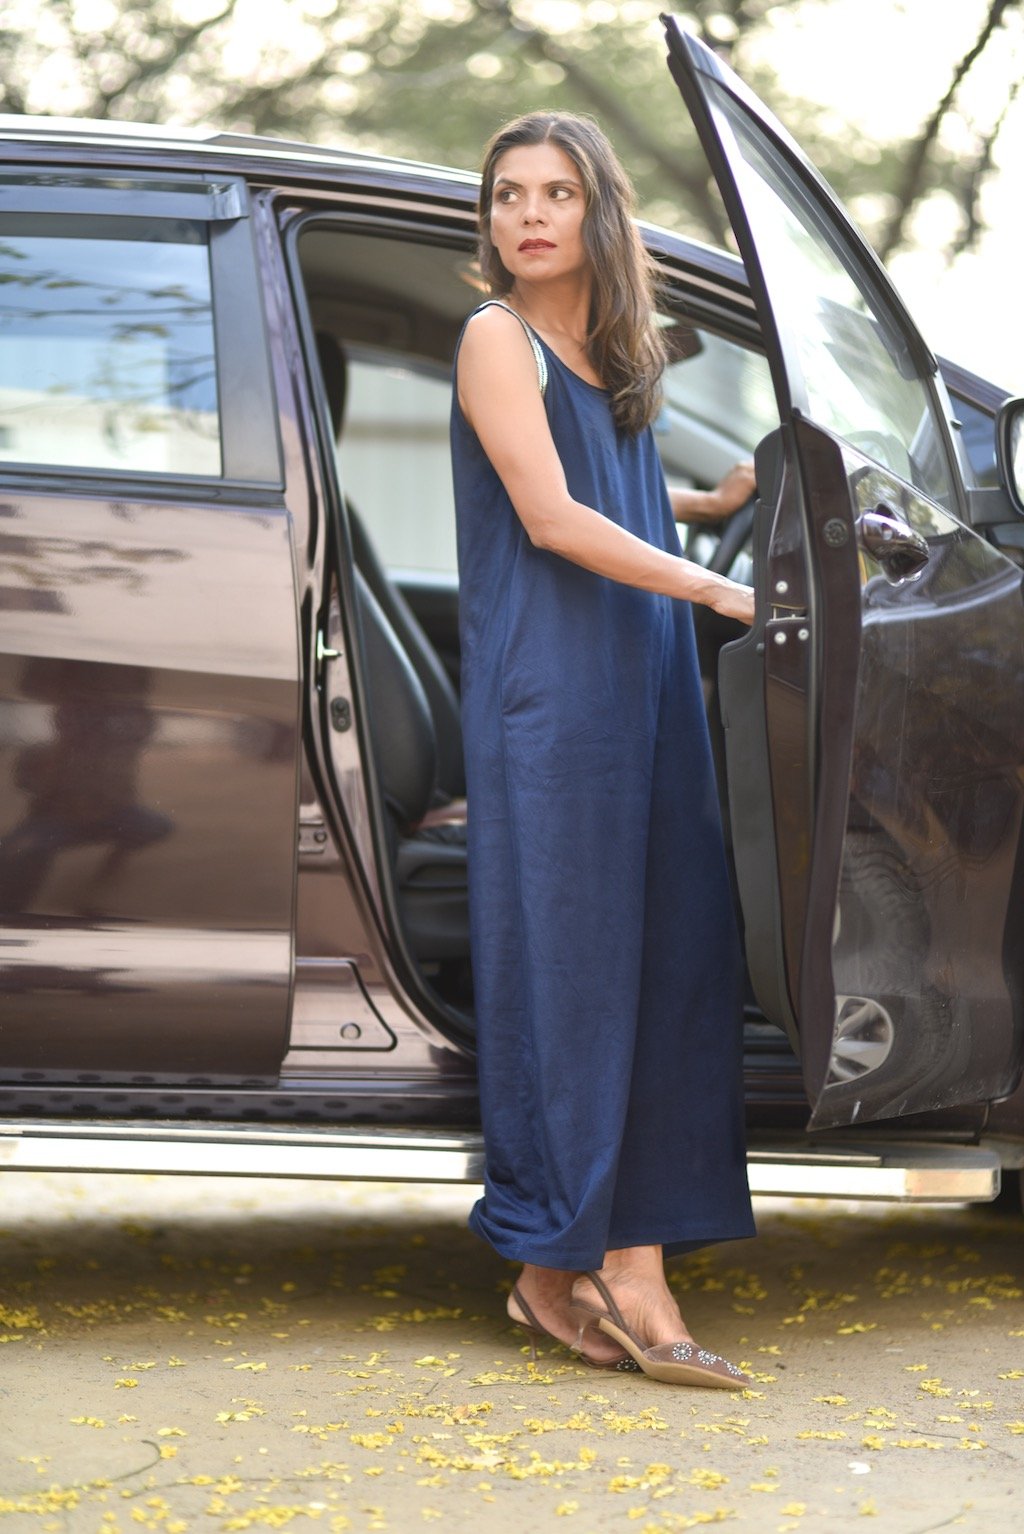 Moscow, Organic Cotton Maxi Dress in navy Blue, Embroidered at Shoulder - kinchecom